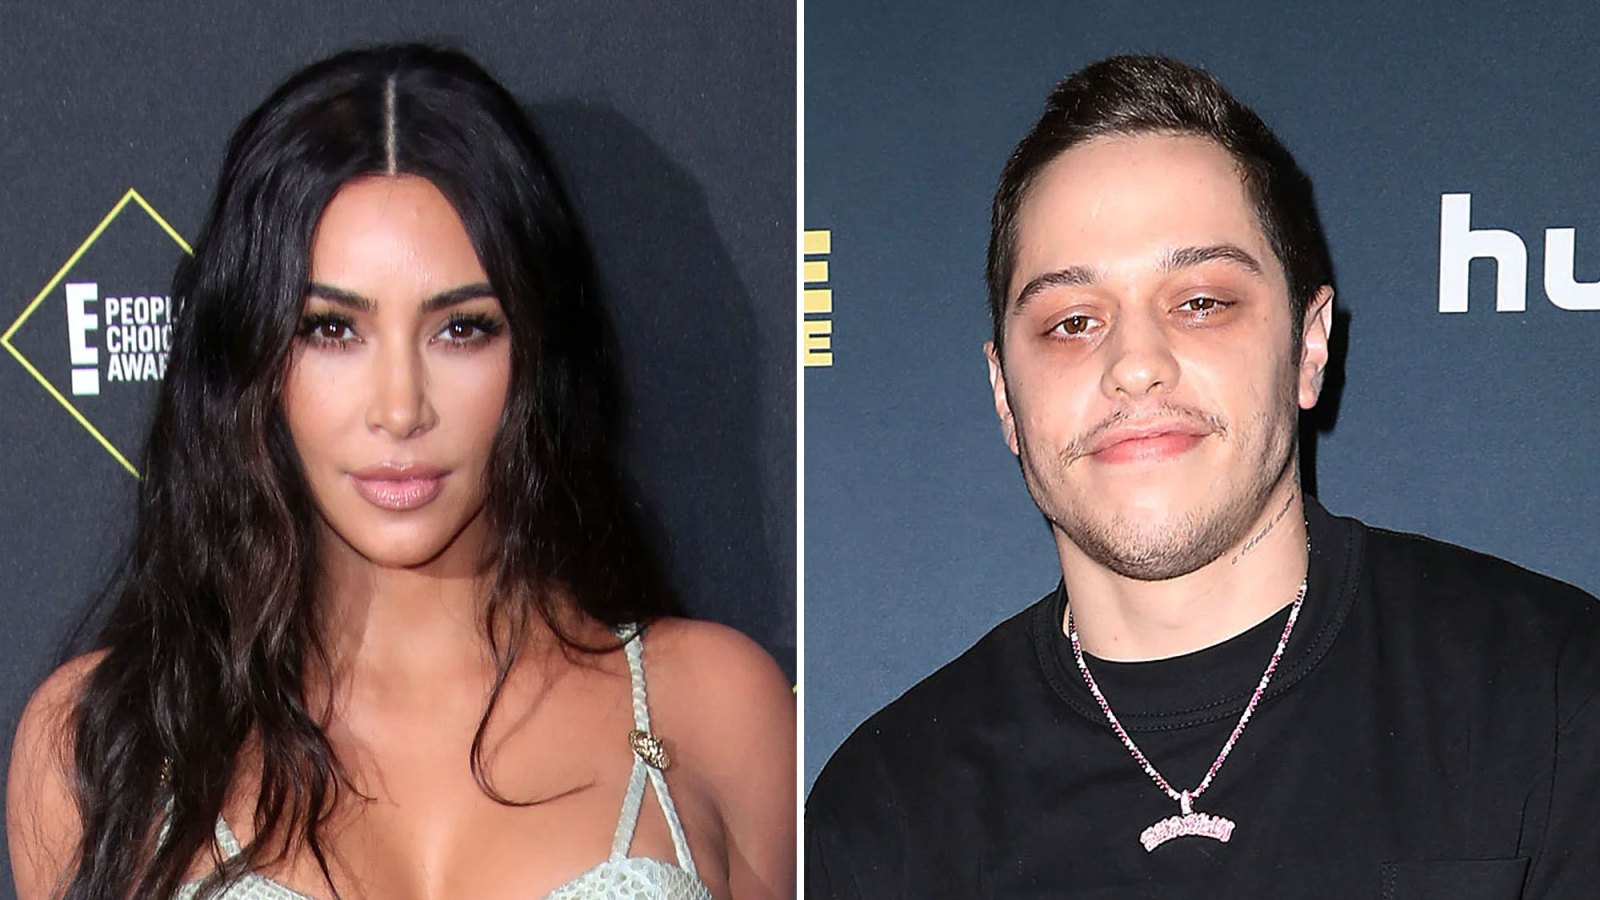 Kim Kardashian Shares Sweet Pictures With Pete Davidson From Their Appearance at The Kardashians Premiere